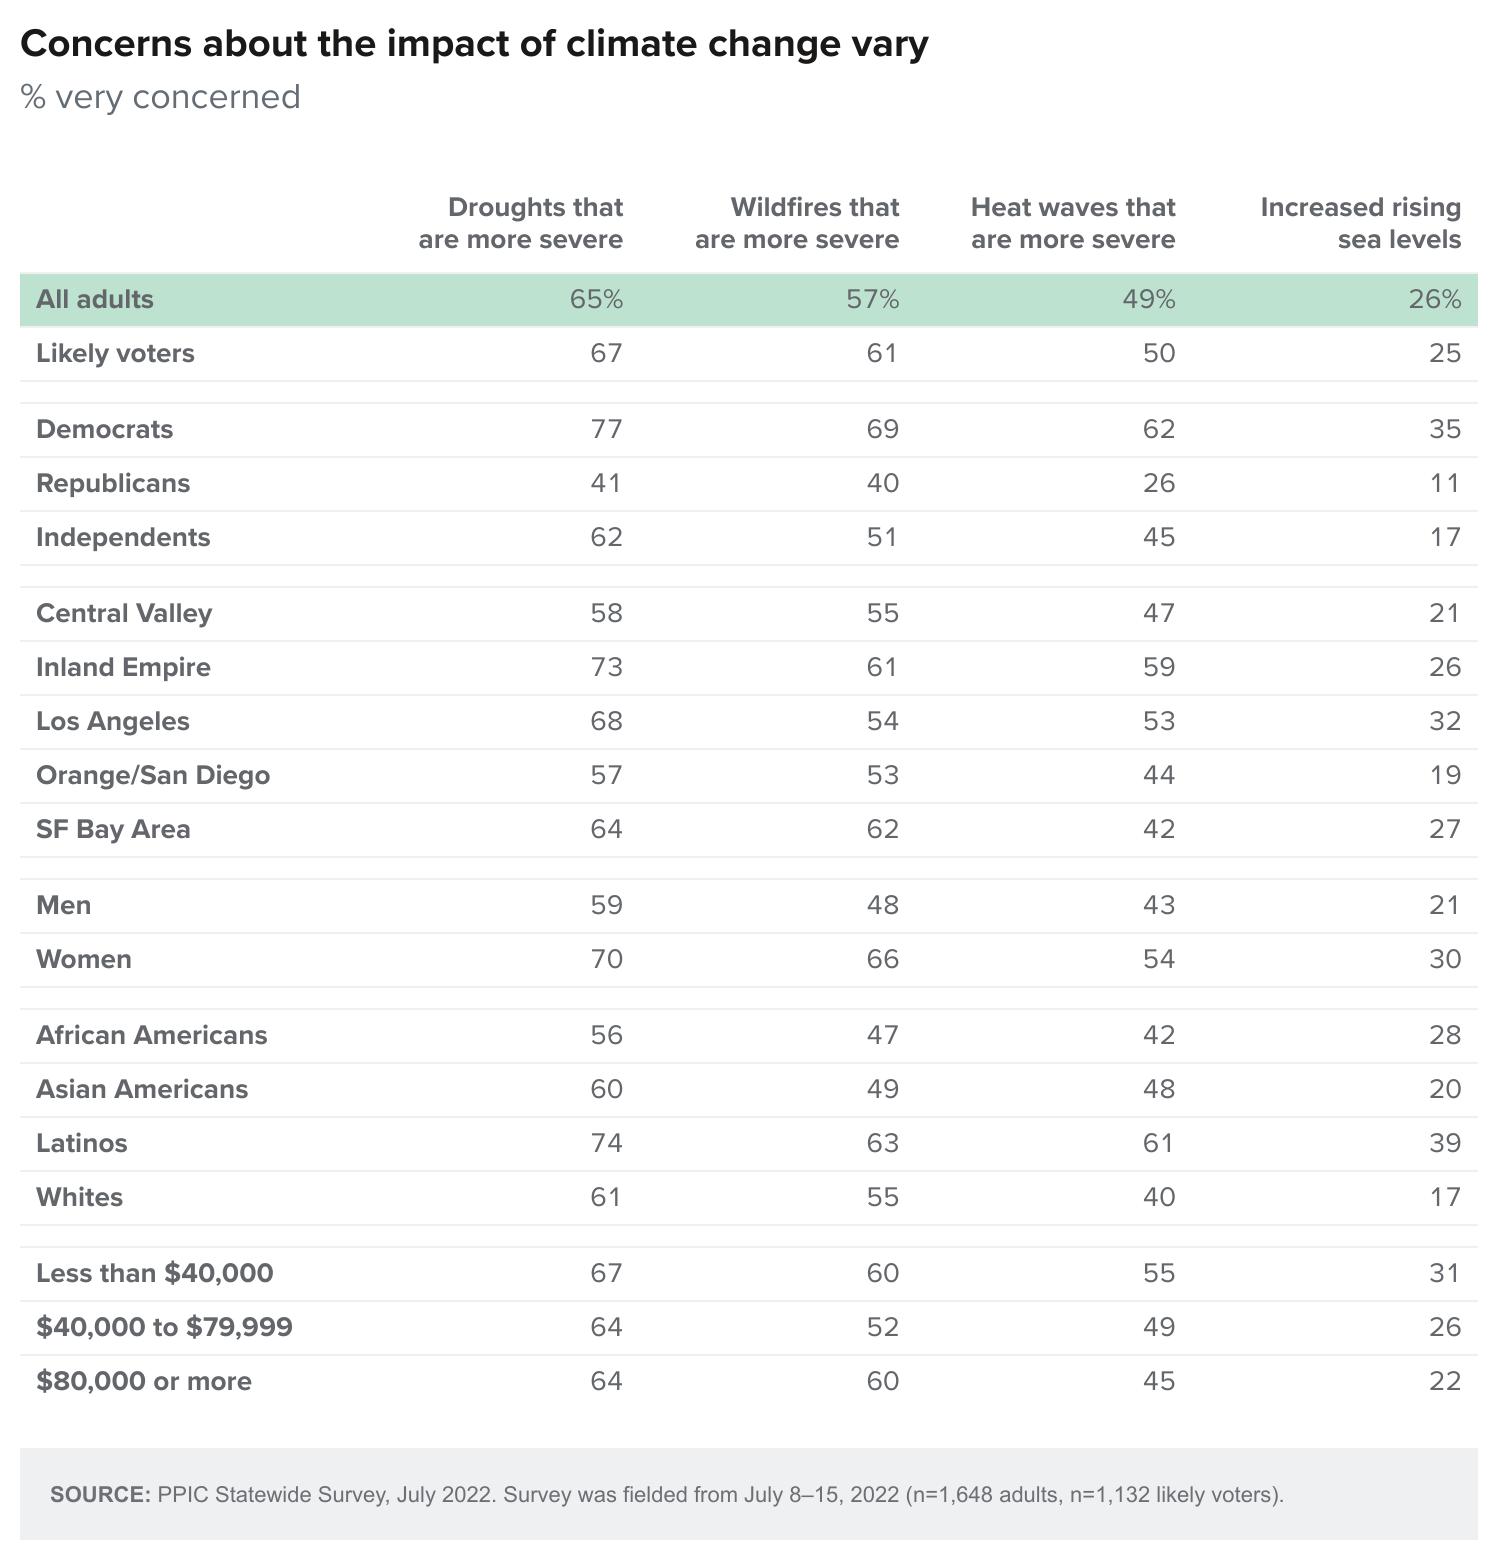 table - Concerns about the impact of climate change vary